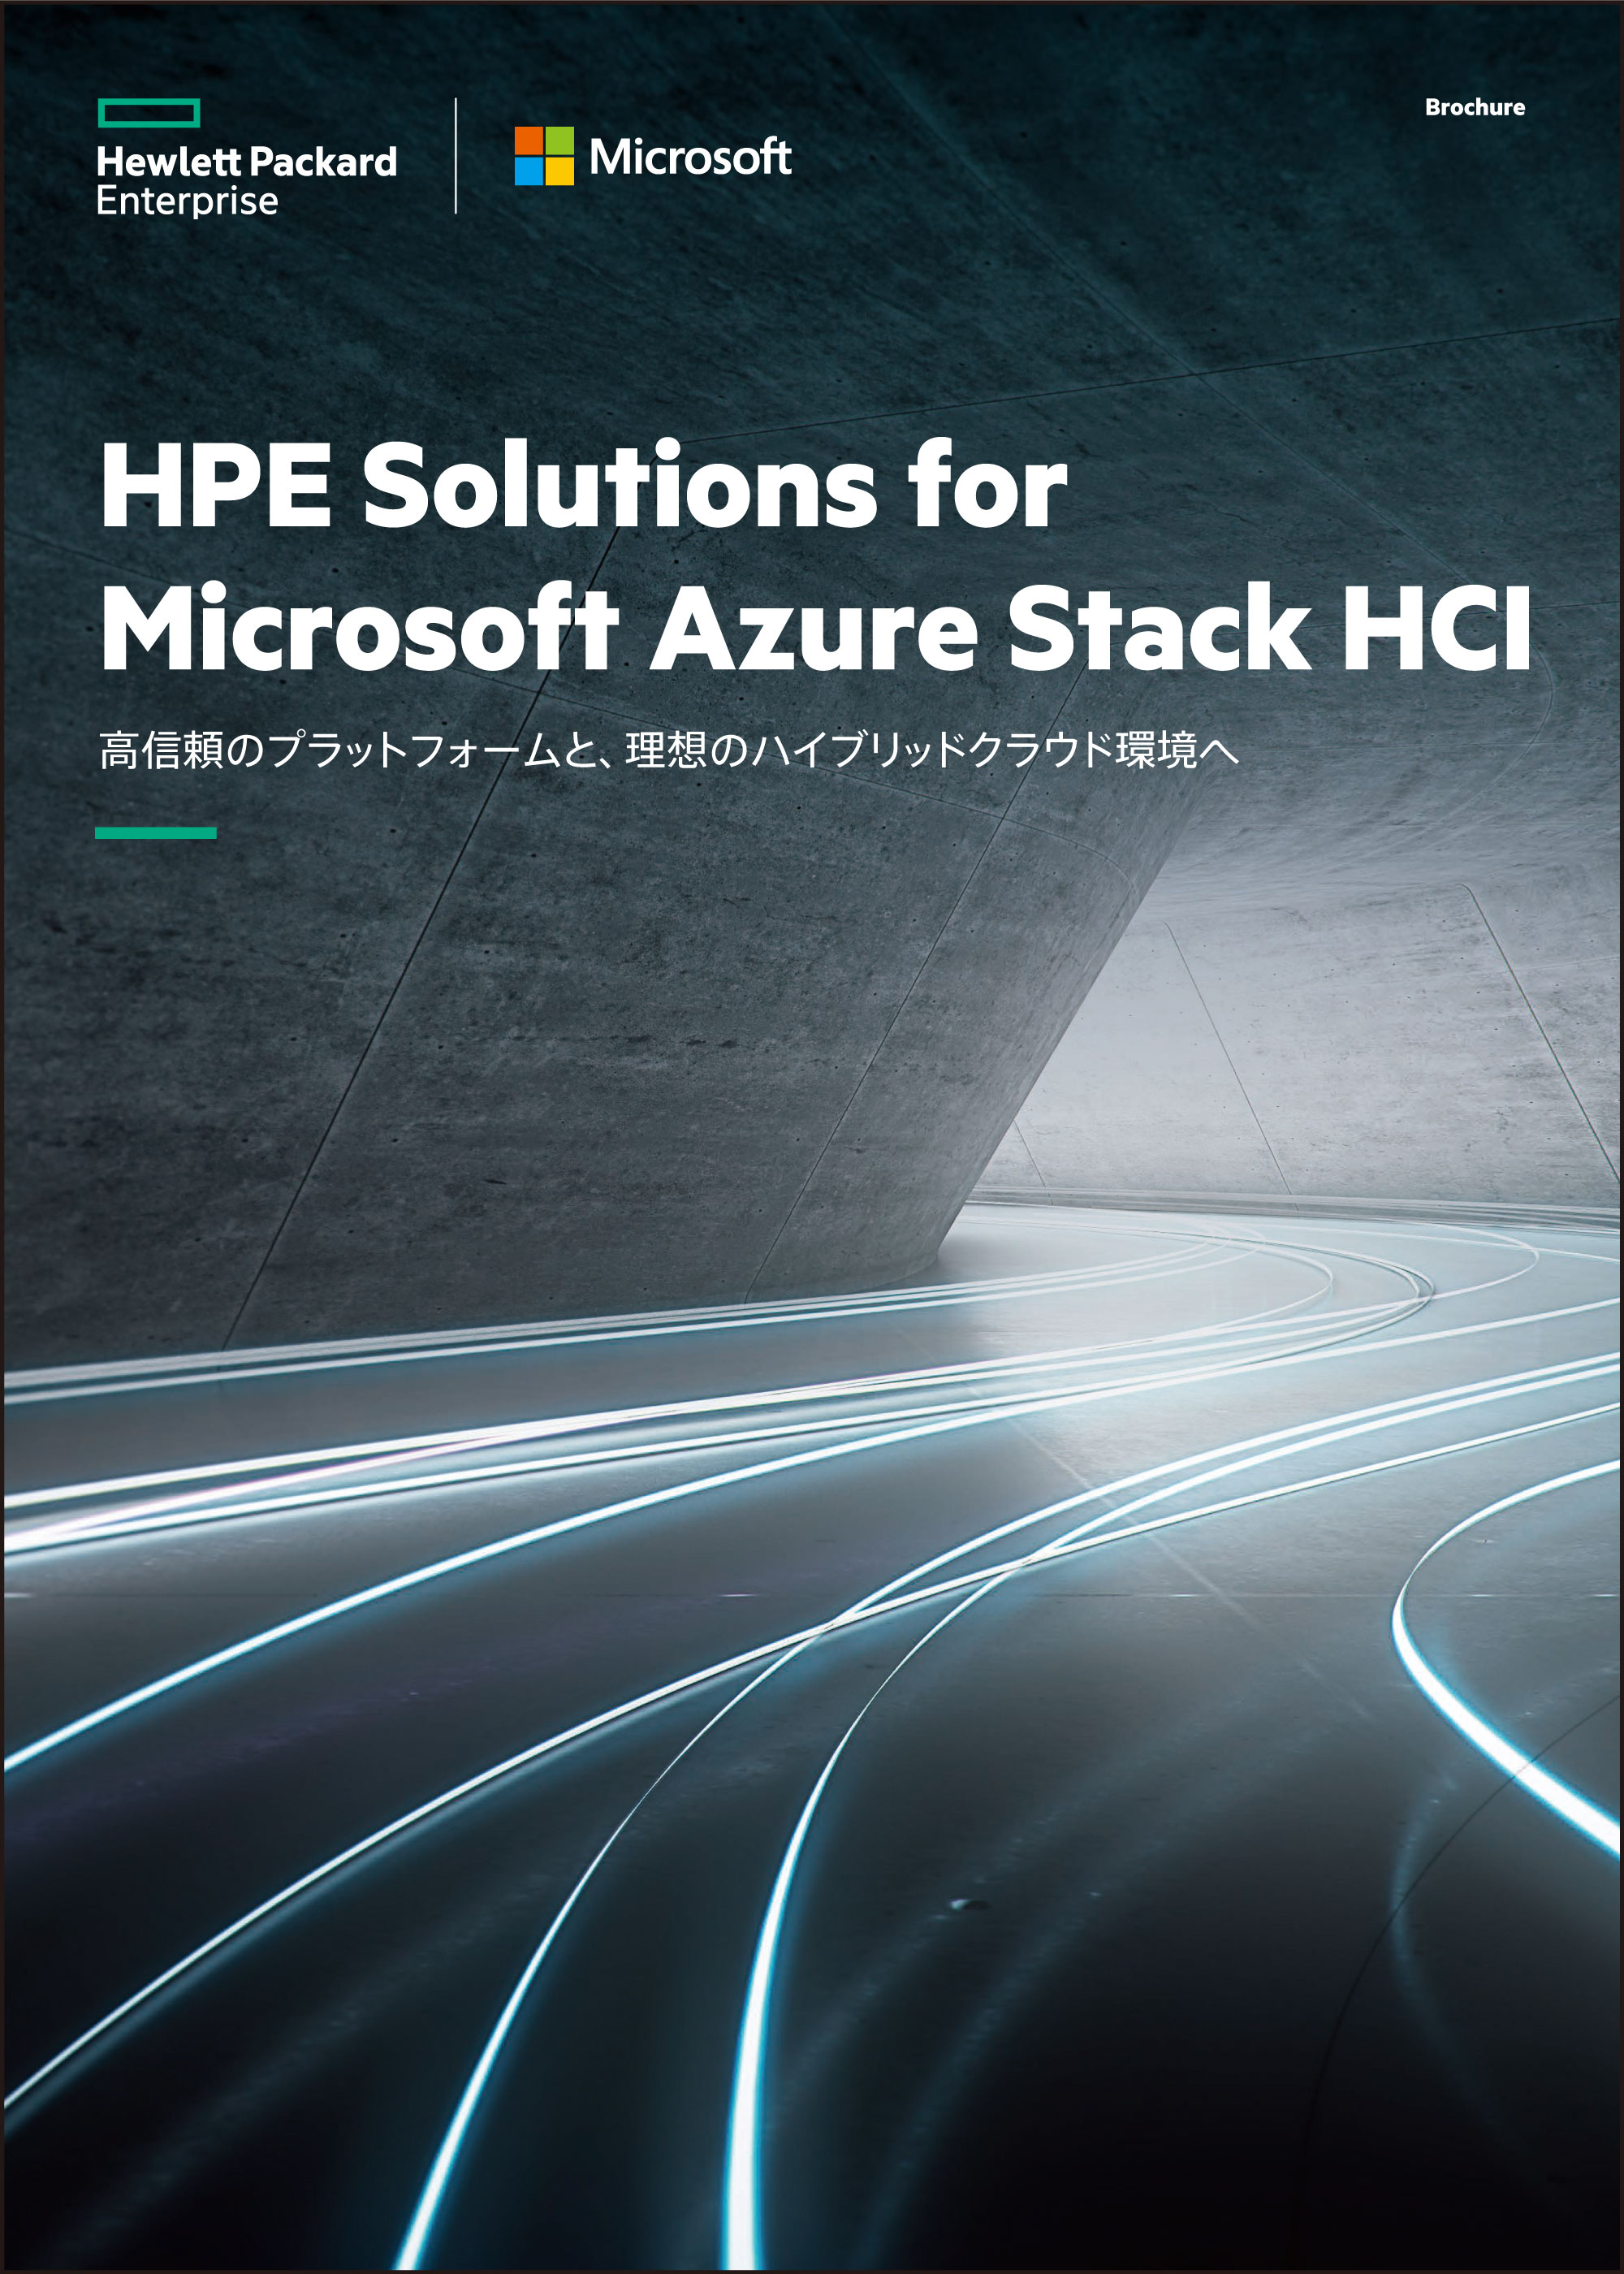 HPE Solutions for Microsoft Azure Stack HCI